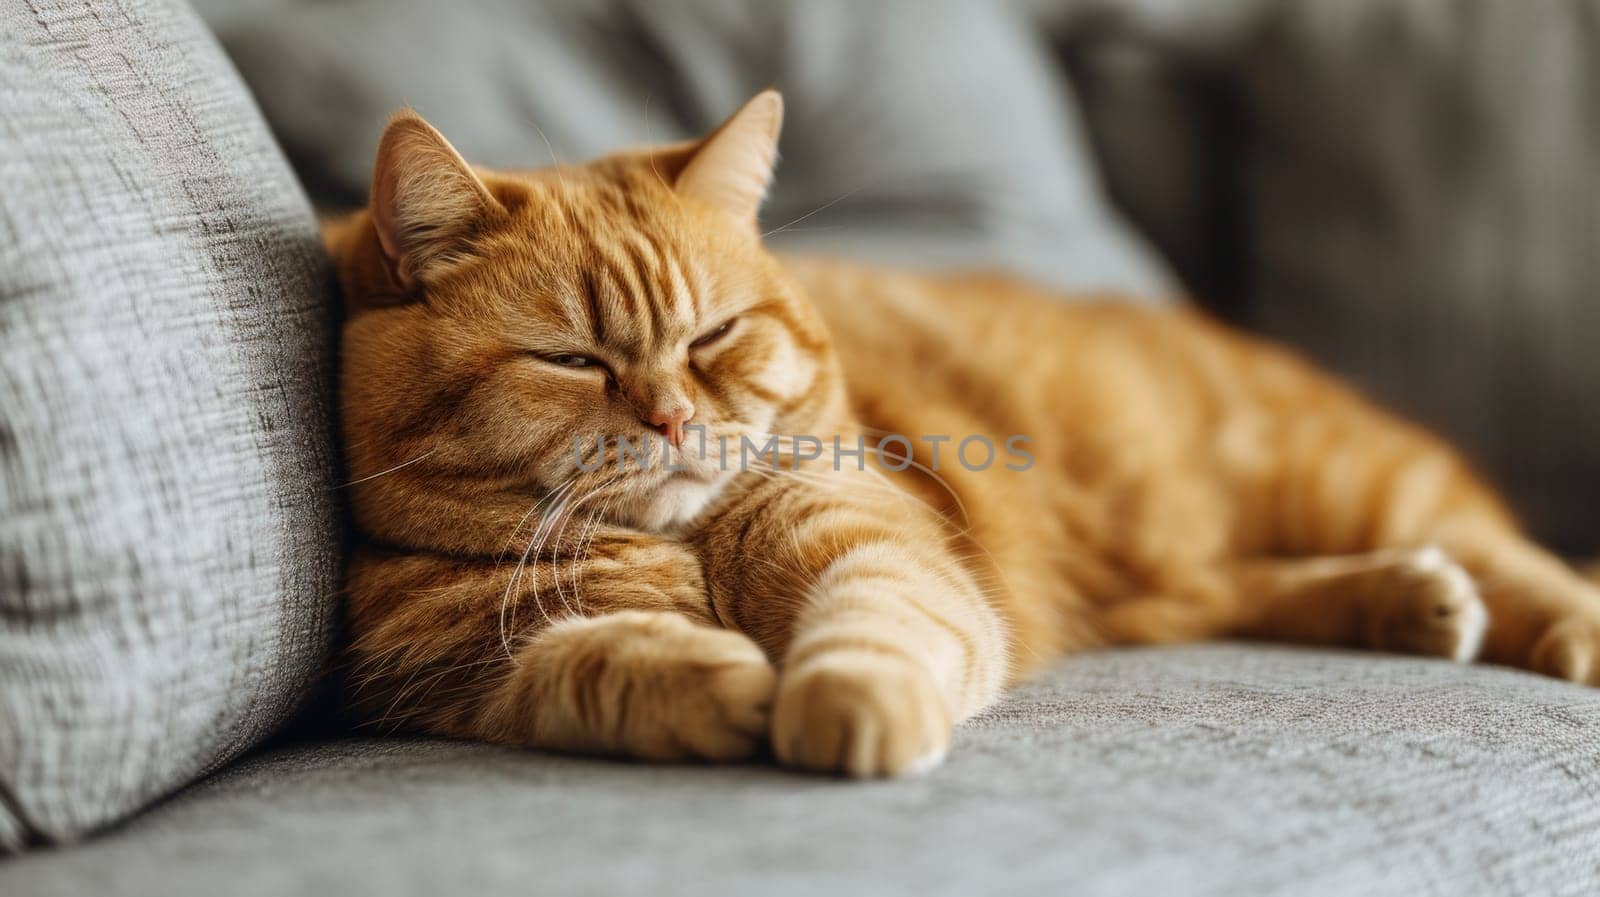 A cat laying on a couch with its eyes closed, AI by starush